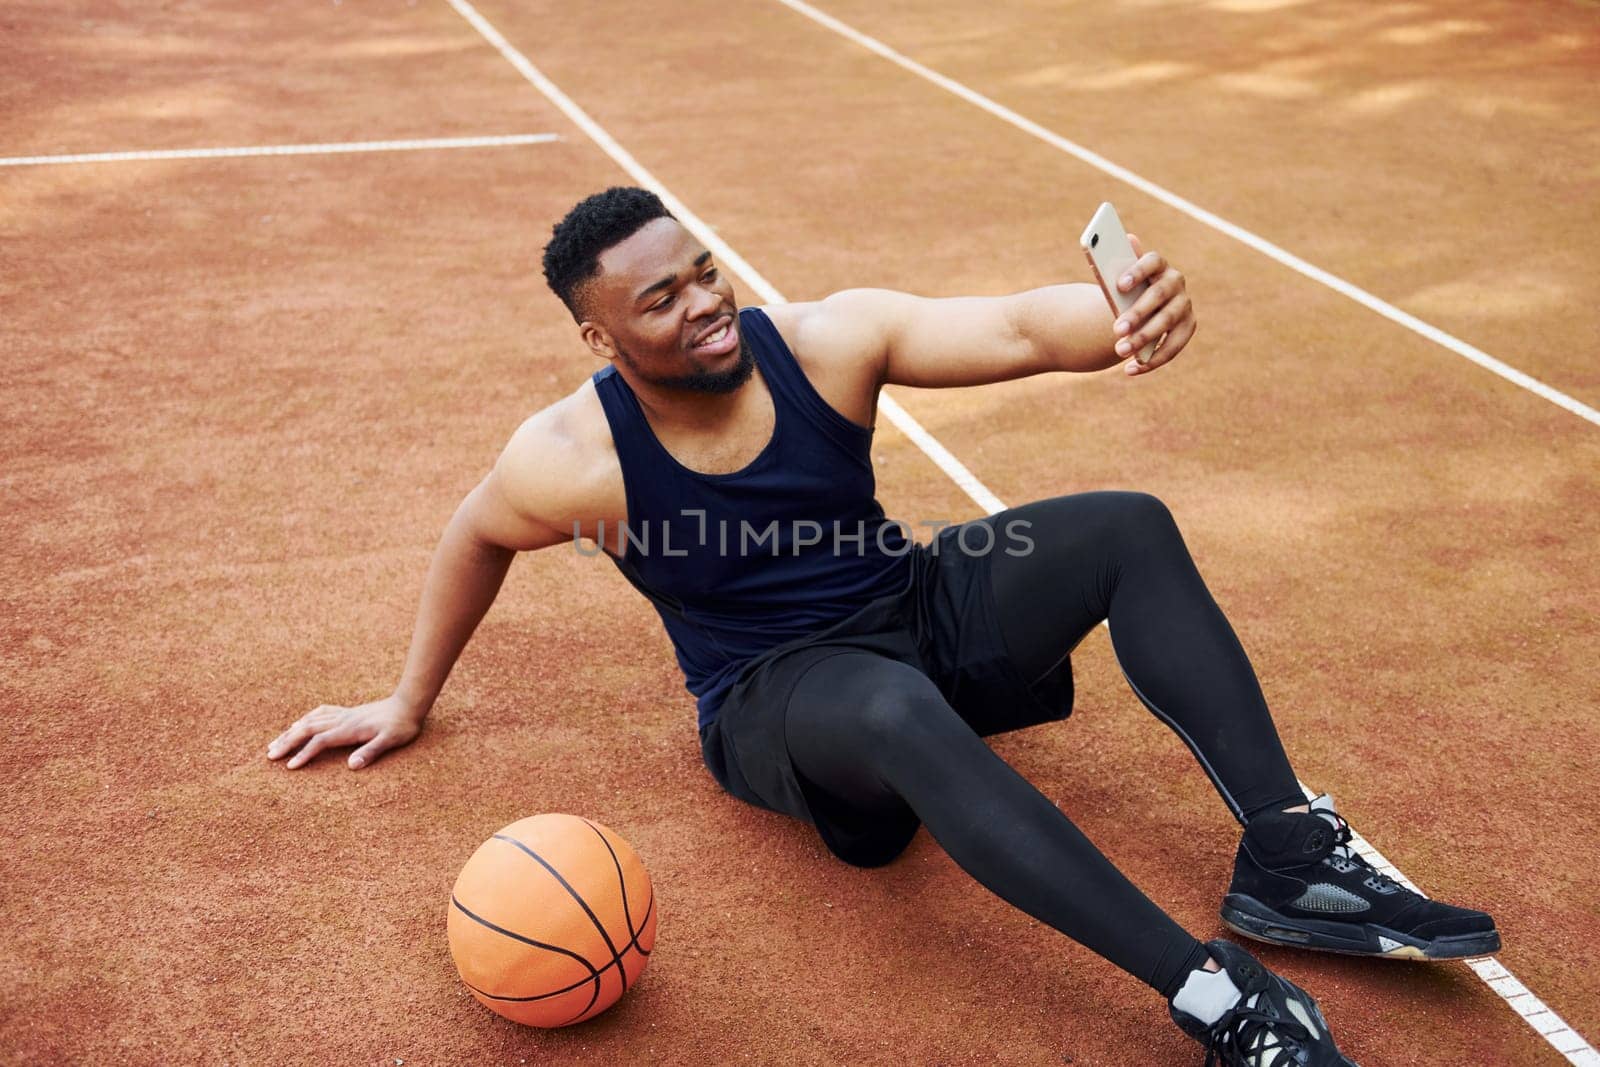 Making selfie. African american man plays basketball on the court outdoors.